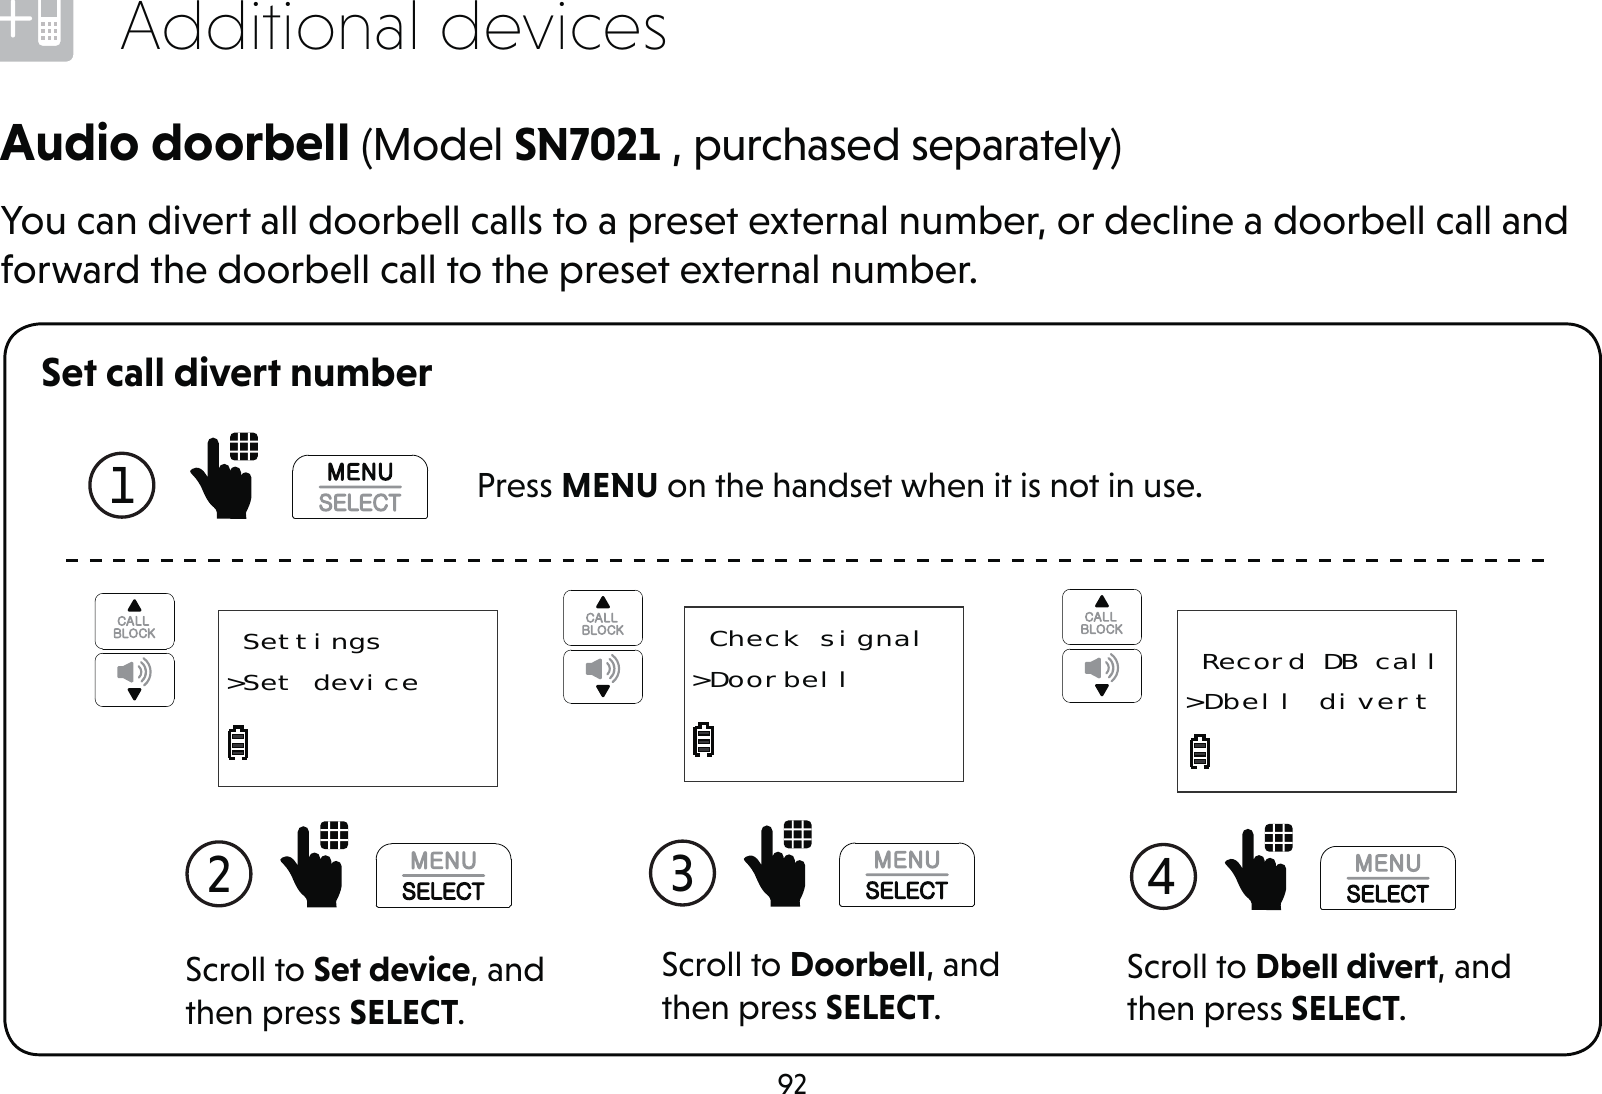 92Additional devicesSet call divert numberAudio doorbell (Model SN7021 , purchased separately)You can divert all doorbell calls to a preset external number, or decline a doorbell call and forward the doorbell call to the preset external number.Scroll to Doorbell, and then press SELECT.3  Check signal&gt;DoorbellScroll to Set device, and then press SELECT.2   Settings&gt;Set device  Record DB call&gt;Dbell divertScroll to Dbell divert, and then press SELECT.4 1   Press MENU on the handset when it is not in use.